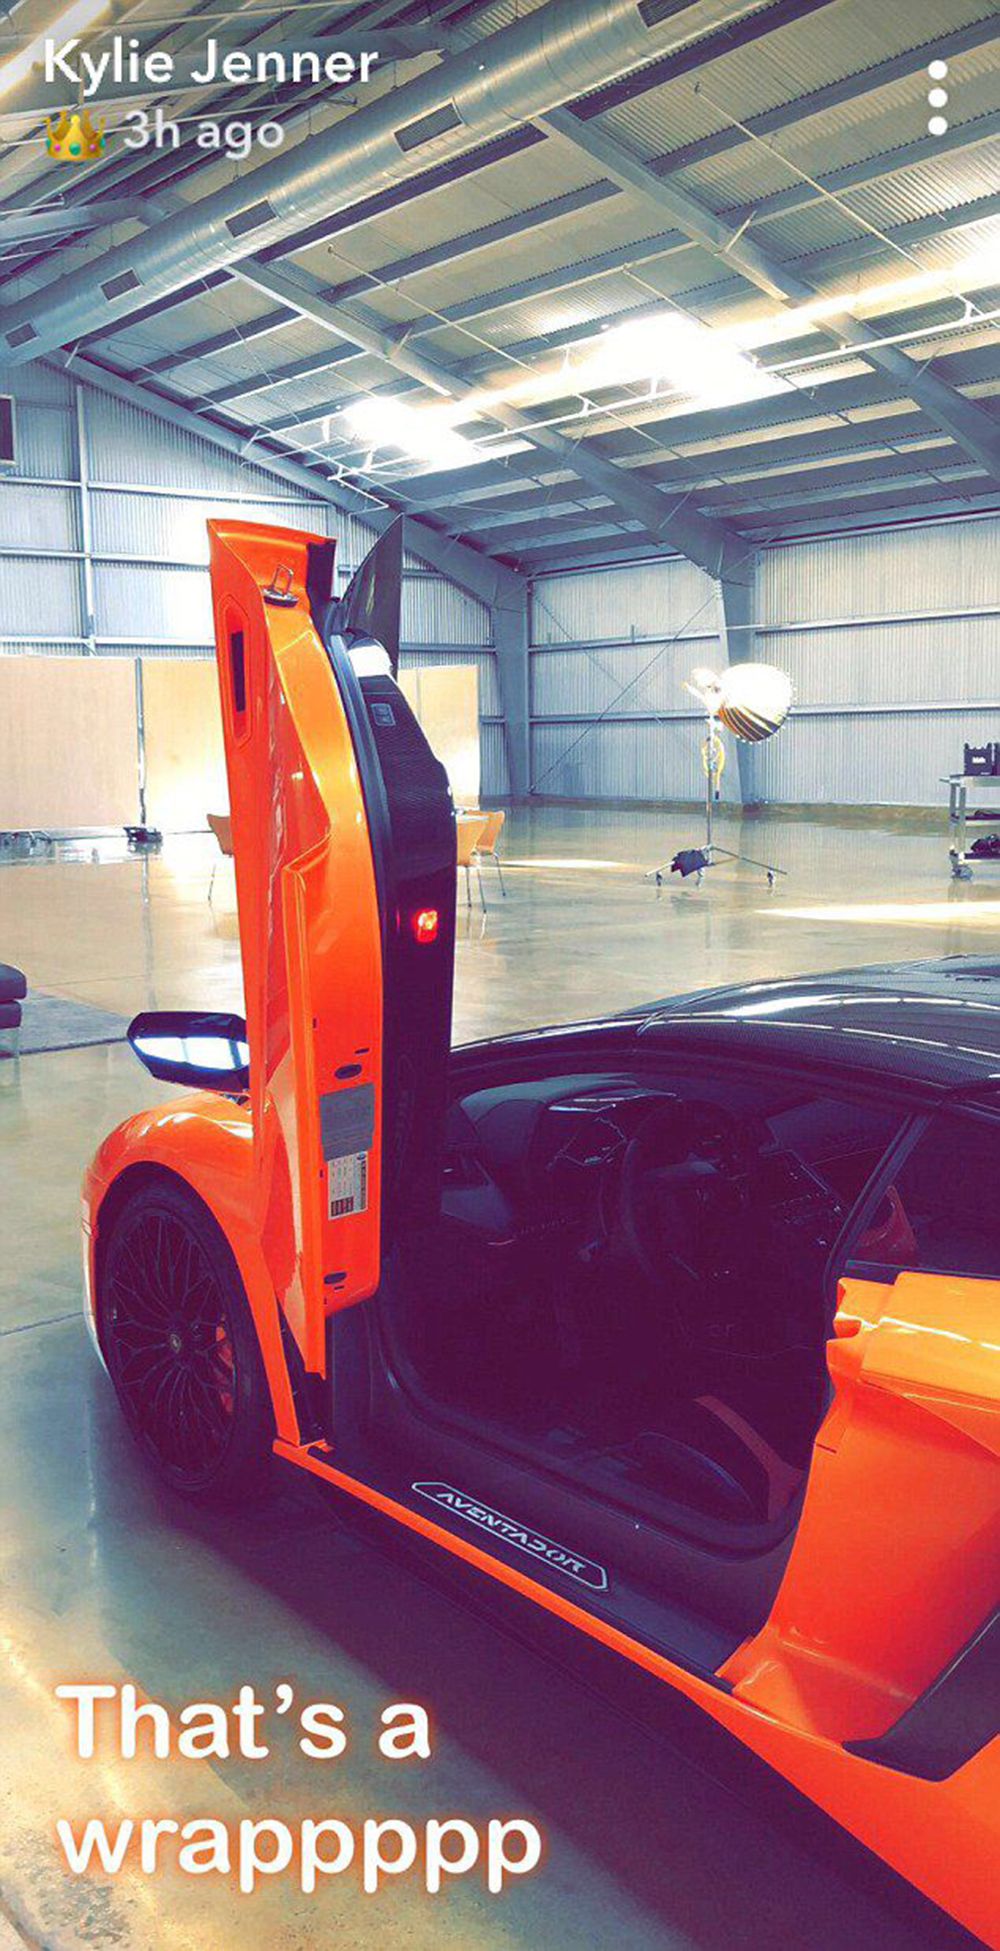 Kylie Jenner Getting Out of a Lamborghini Aventador Roadster March